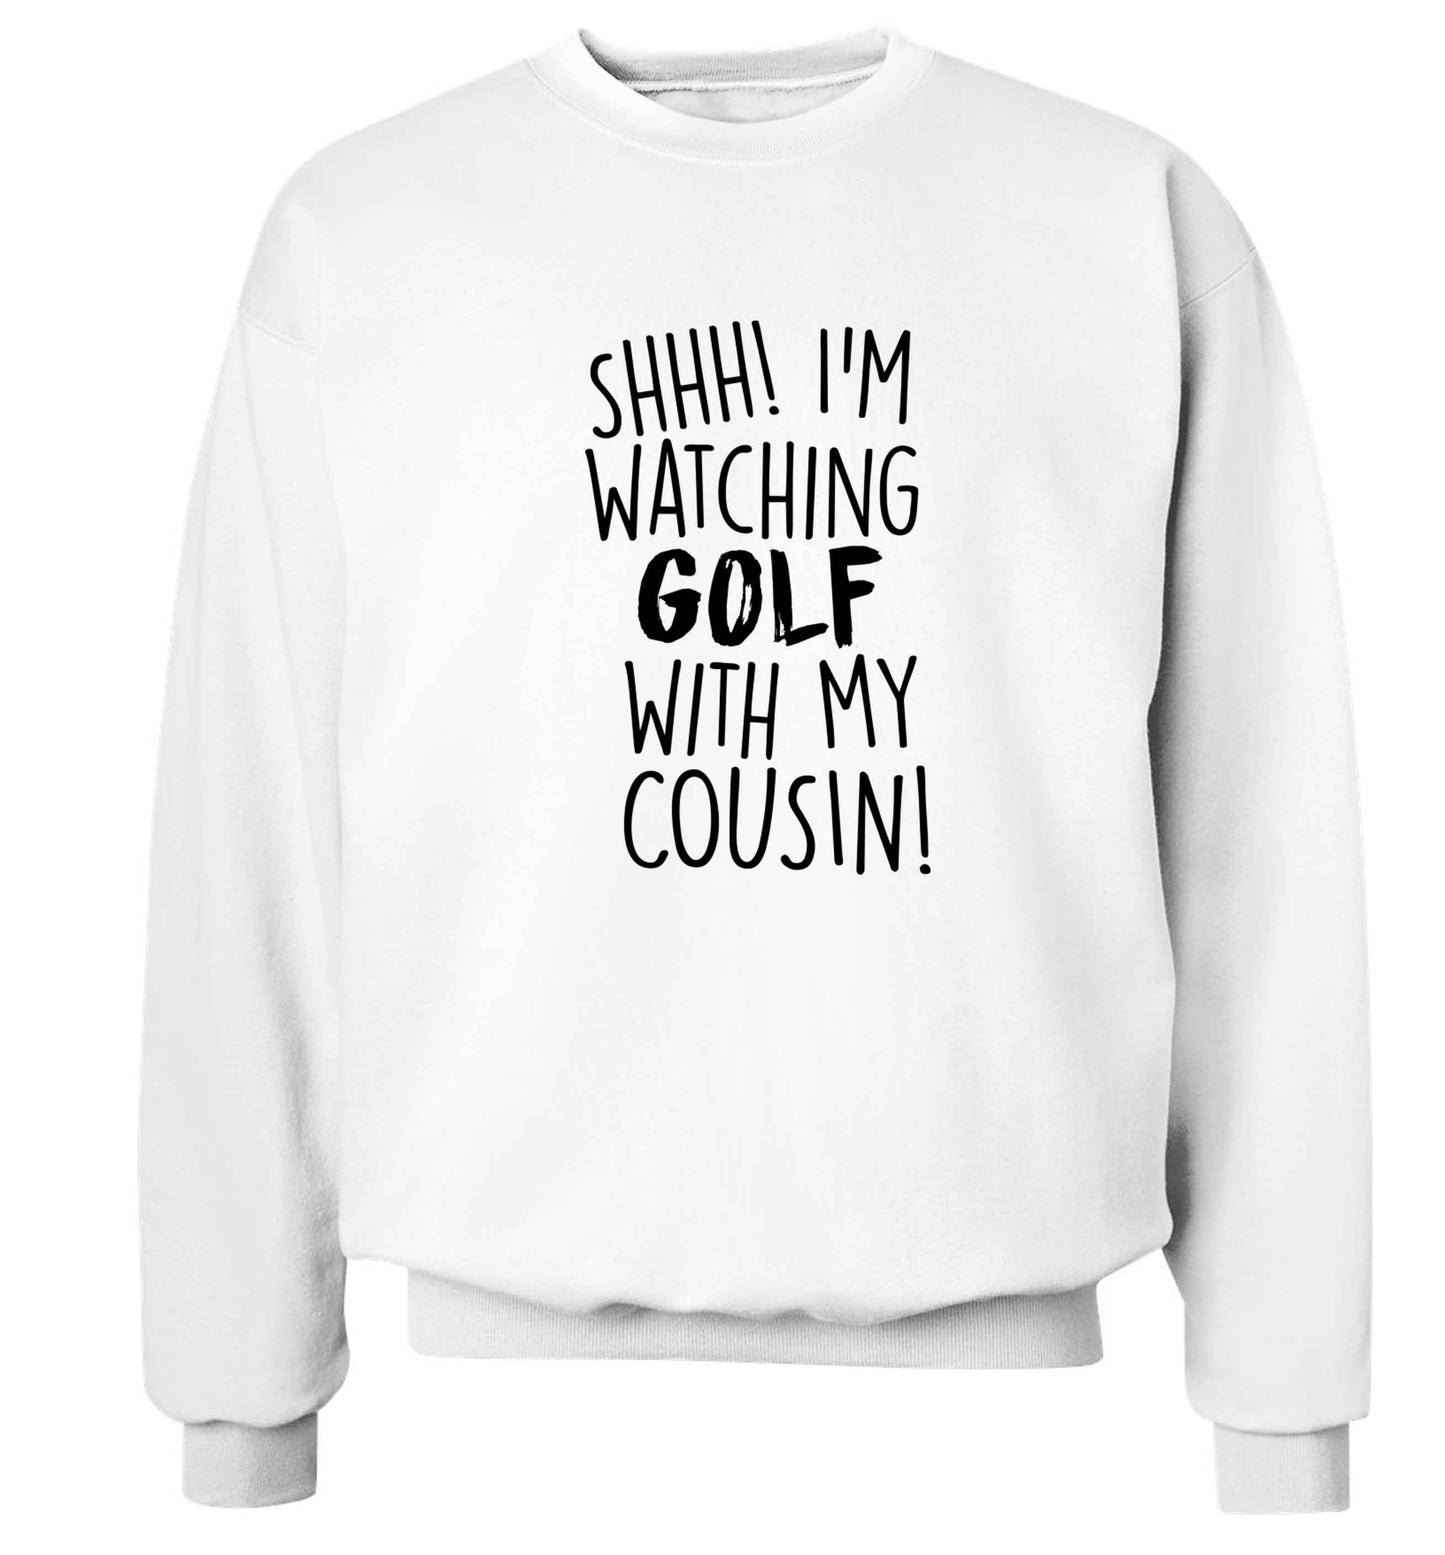 Shh I'm watching golf with my cousin Adult's unisex white Sweater 2XL